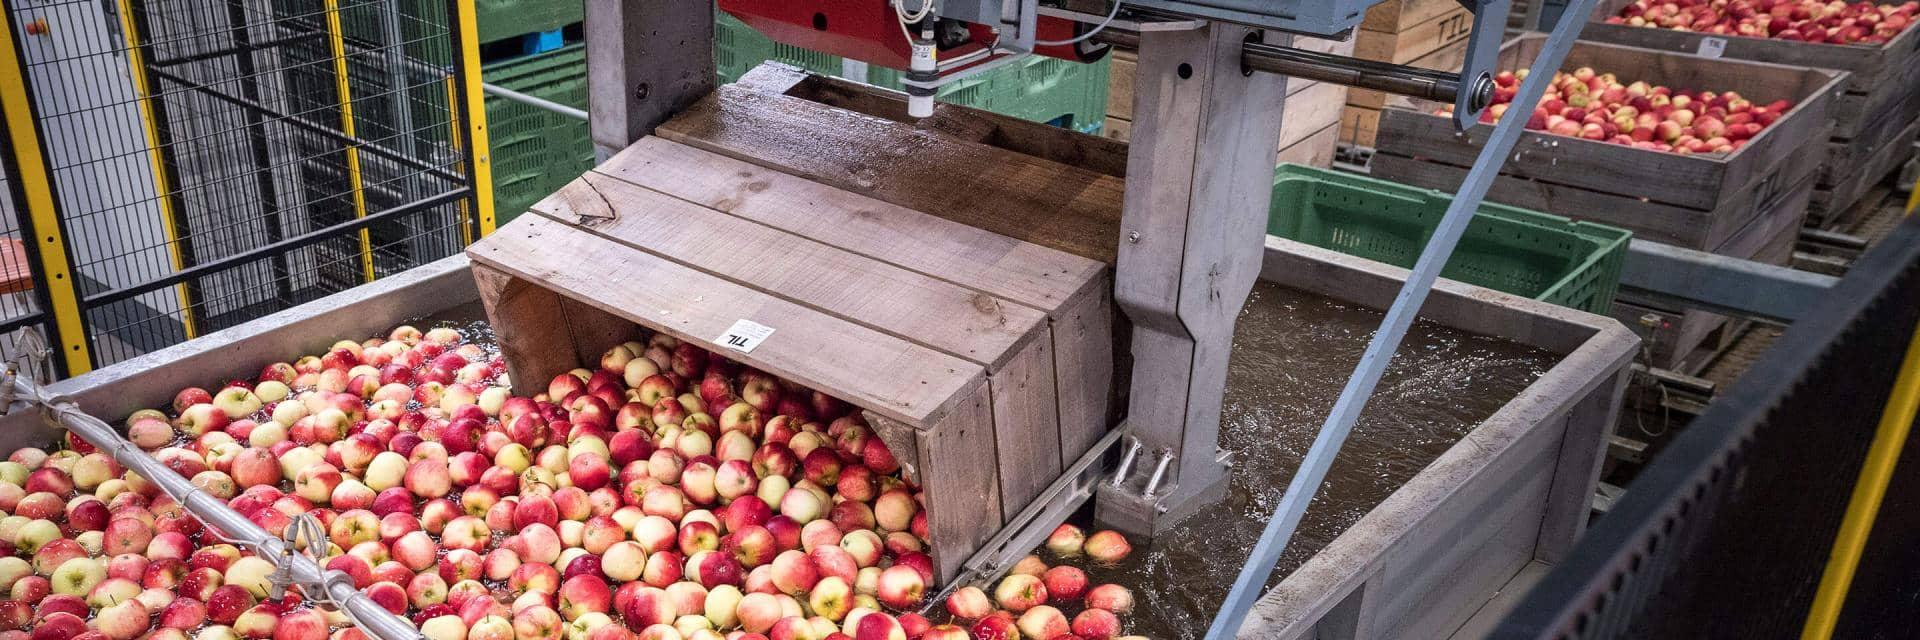 Red apples being processed in a factory production line